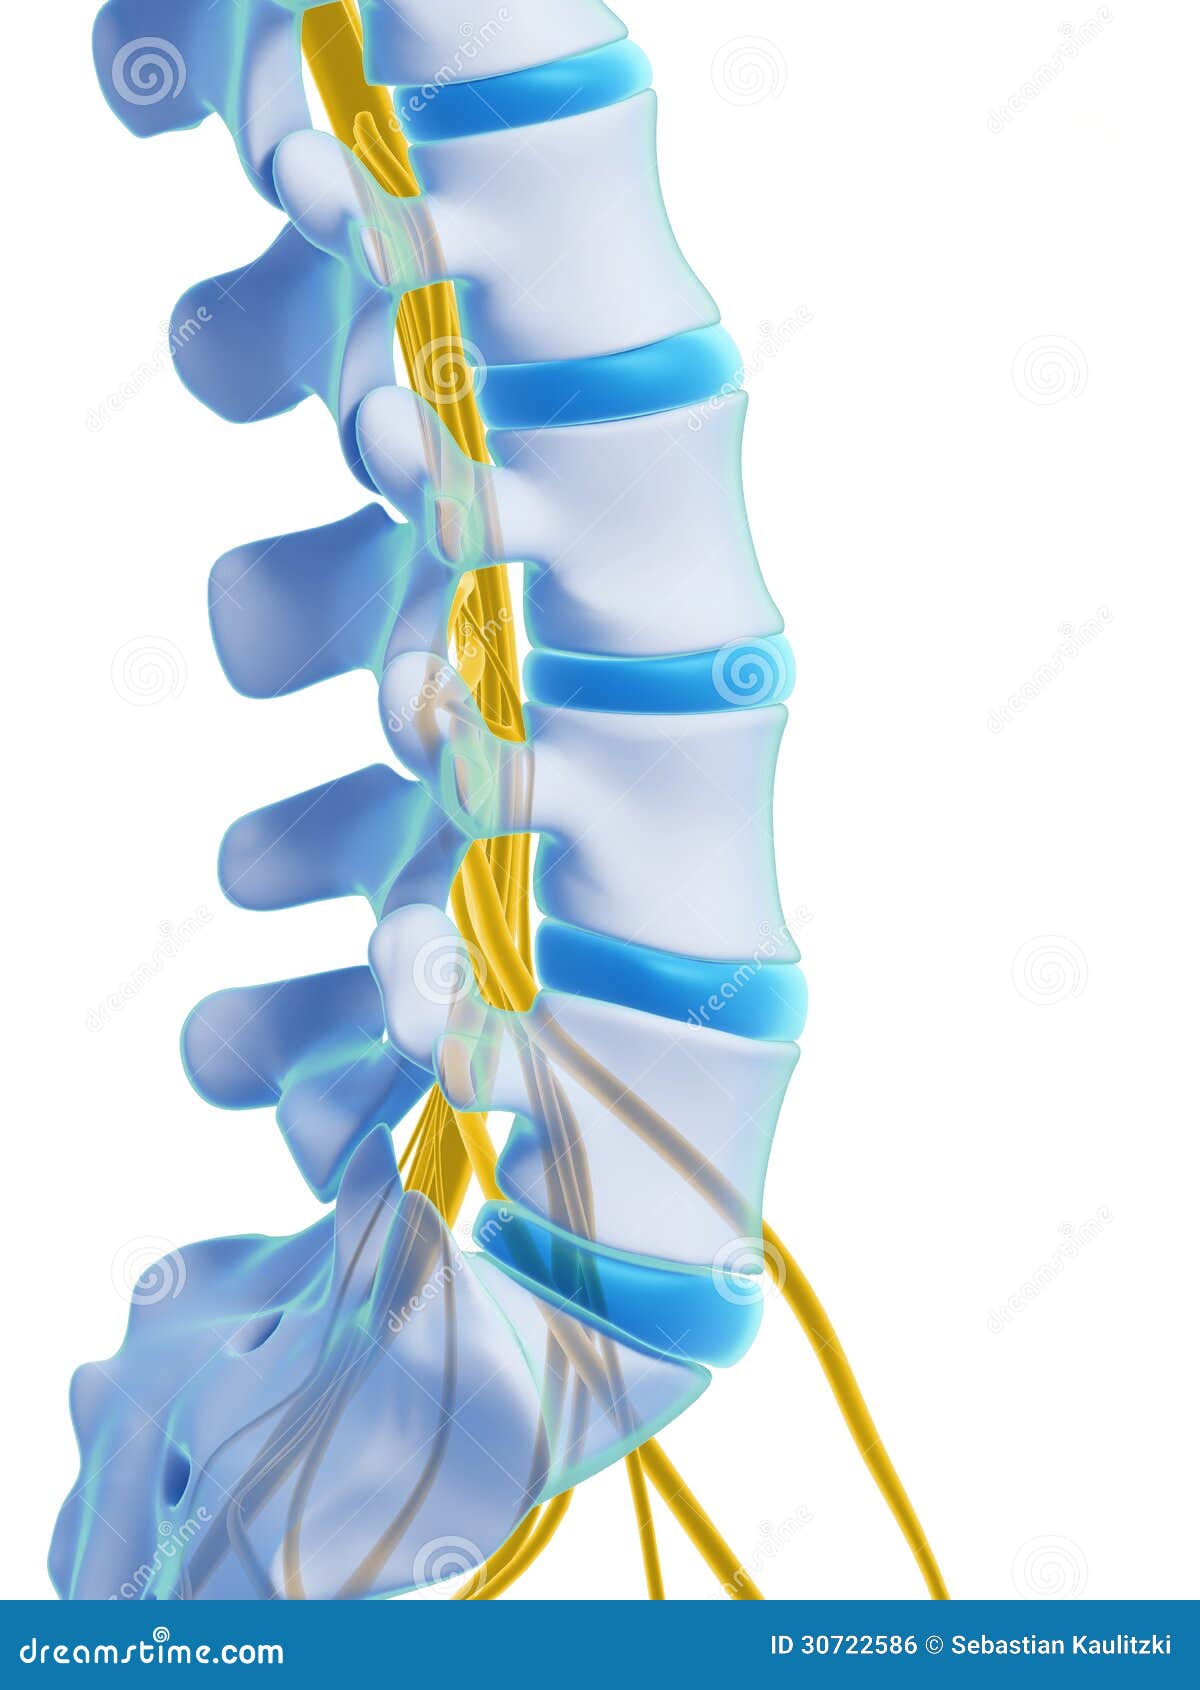 highlighted spinal cord